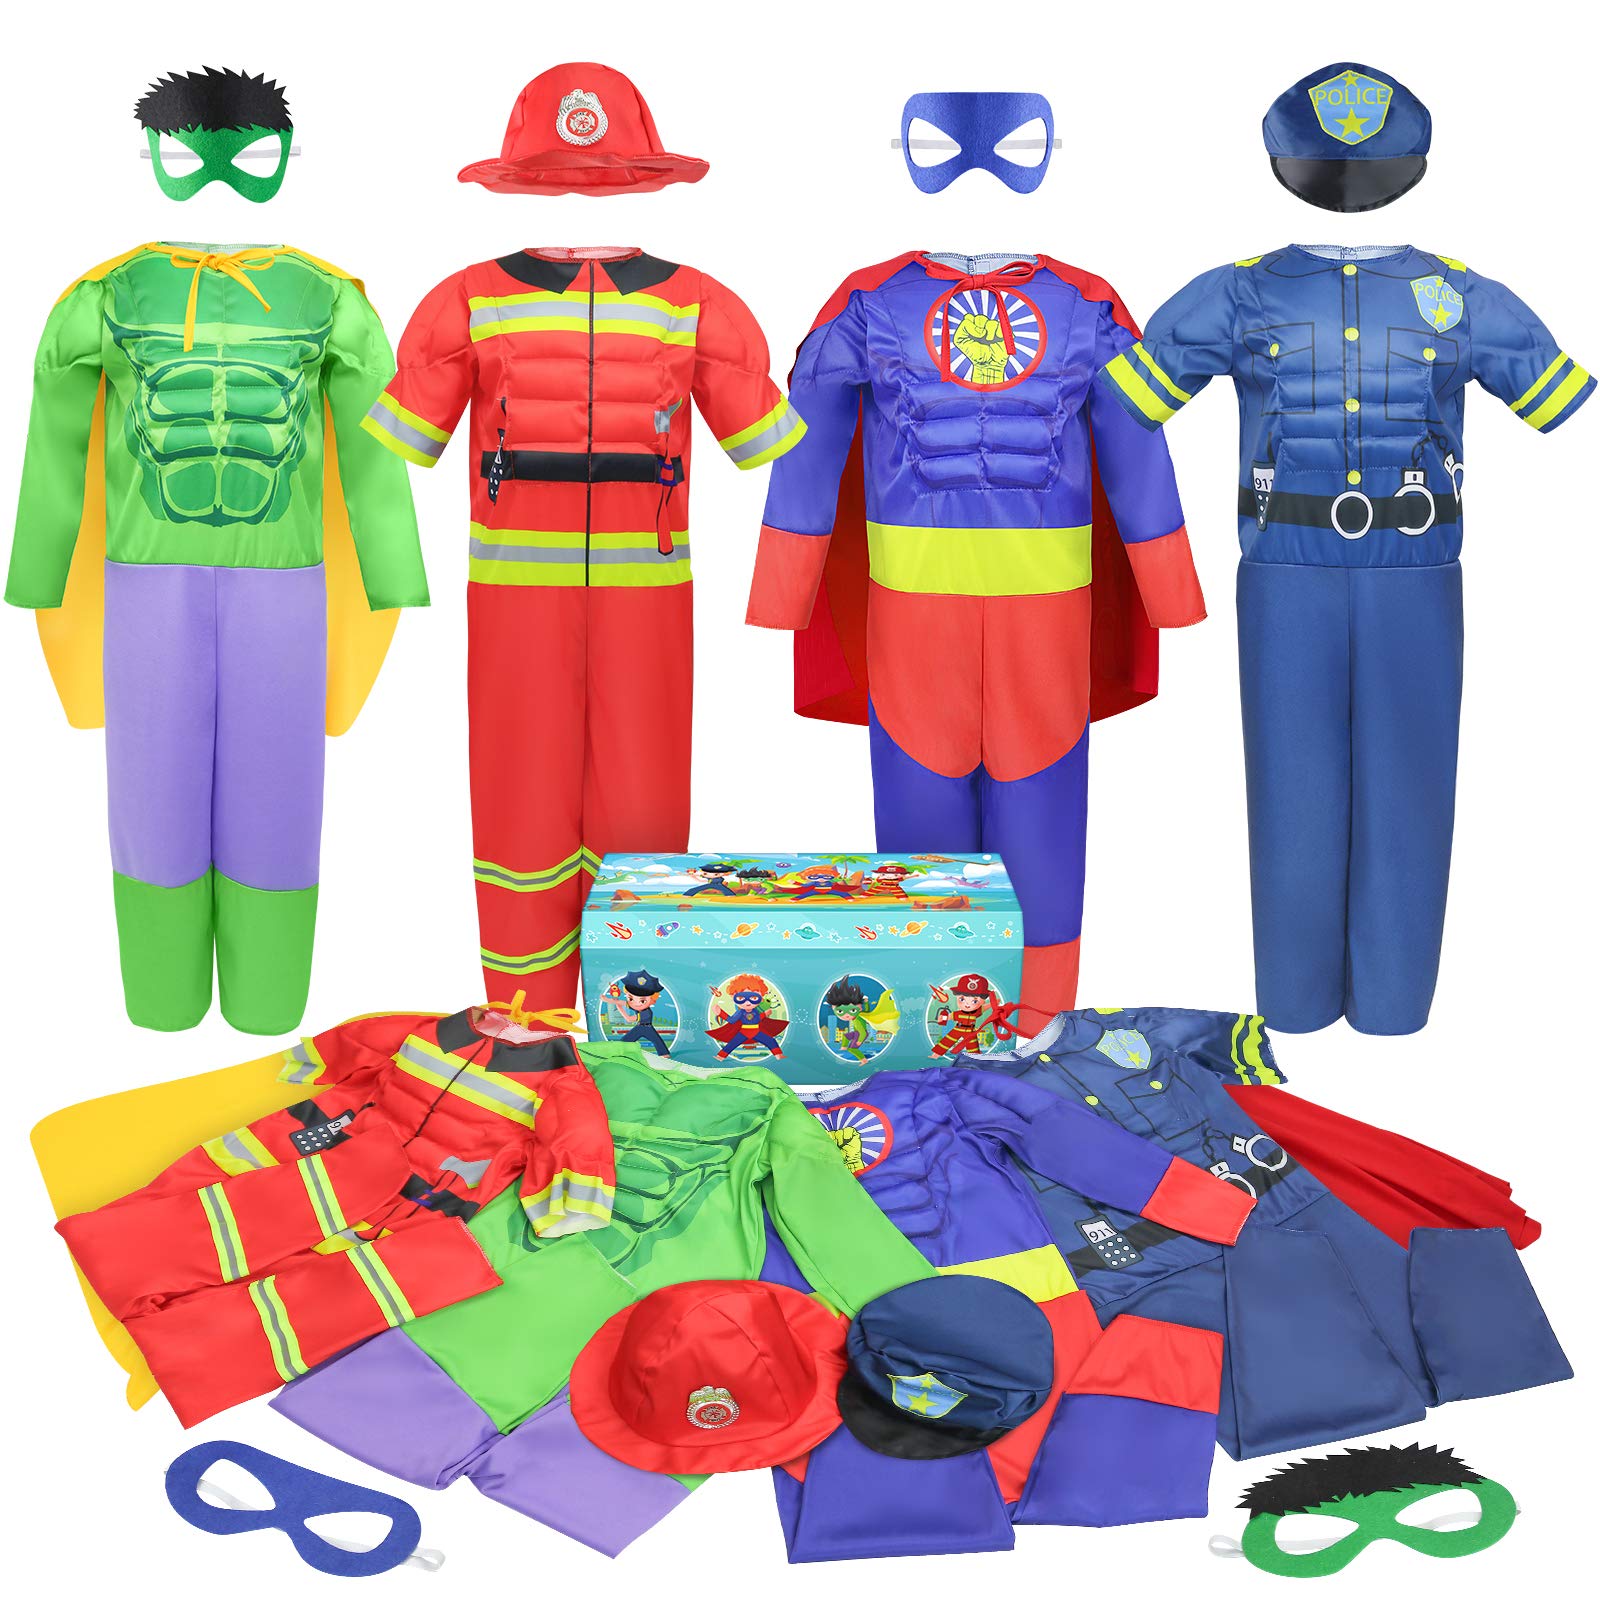 Teuevayl Boys Muscle Chest Dress Up Costumes Trunk With Superhero, Policeman, Fireman Costume, Kids Pretend Role Play Costumes S